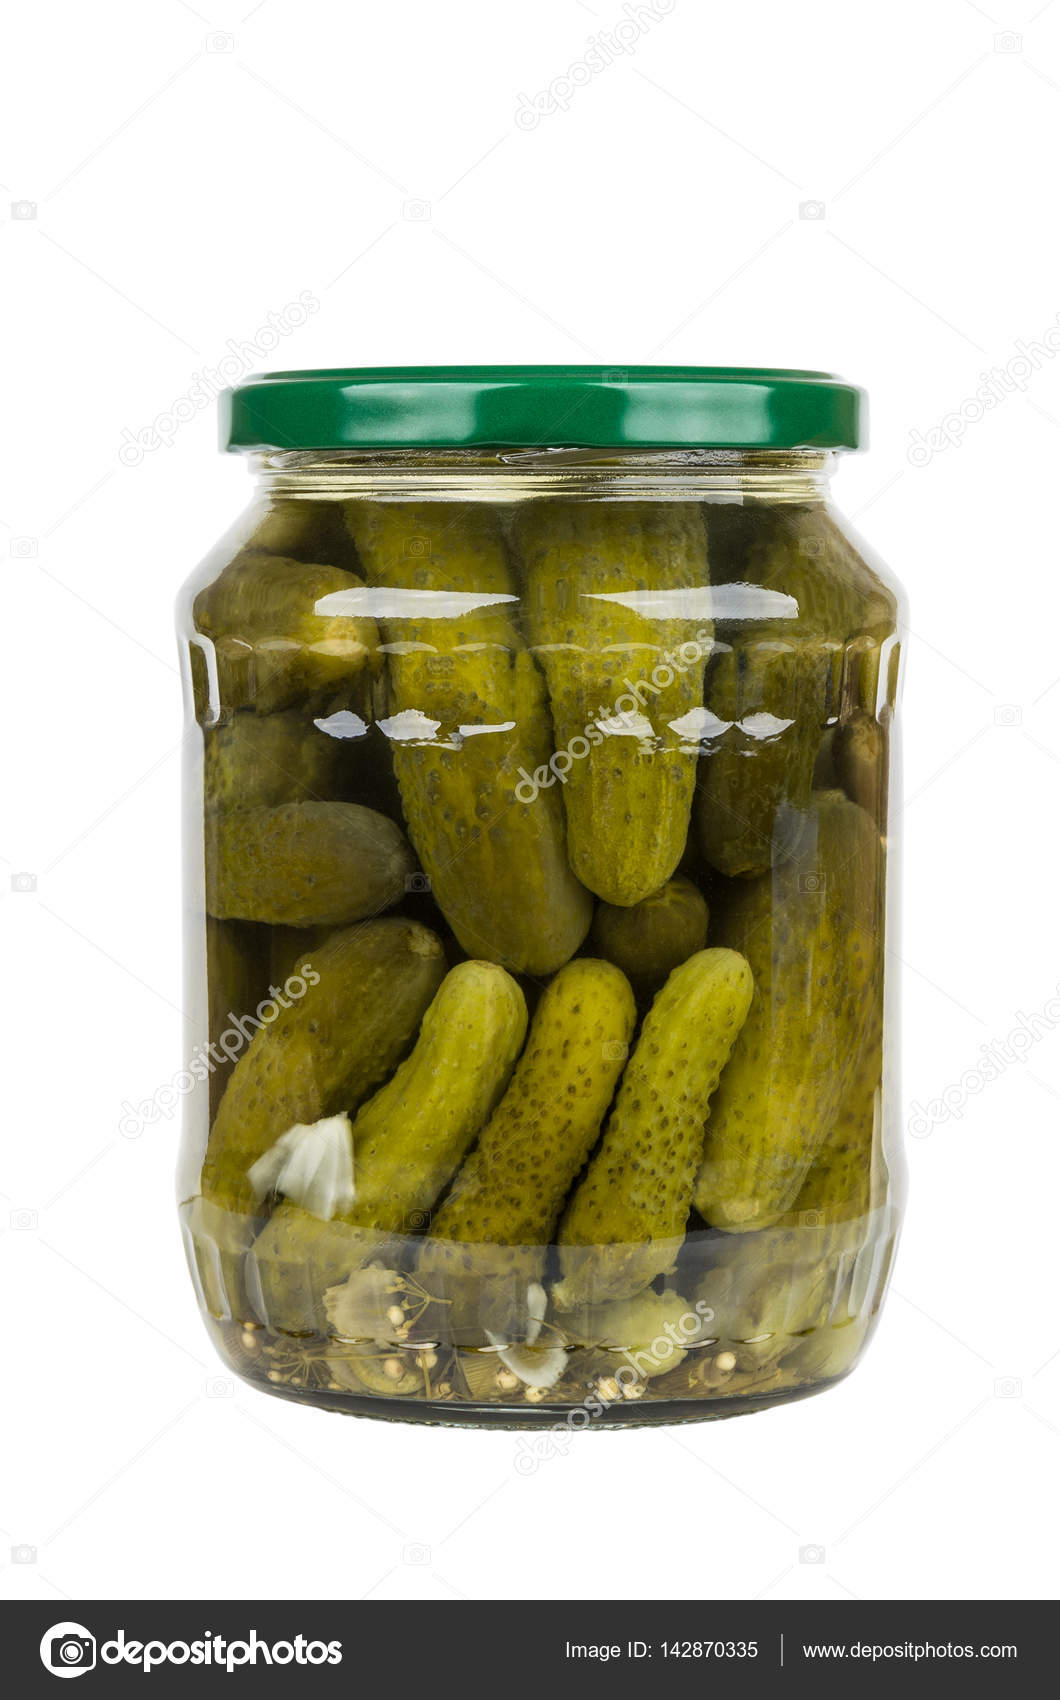 Download Closed Glass Transparent Jar With Gherkins Isolated On White Stock Photo C Firstblood 142870335 Yellowimages Mockups